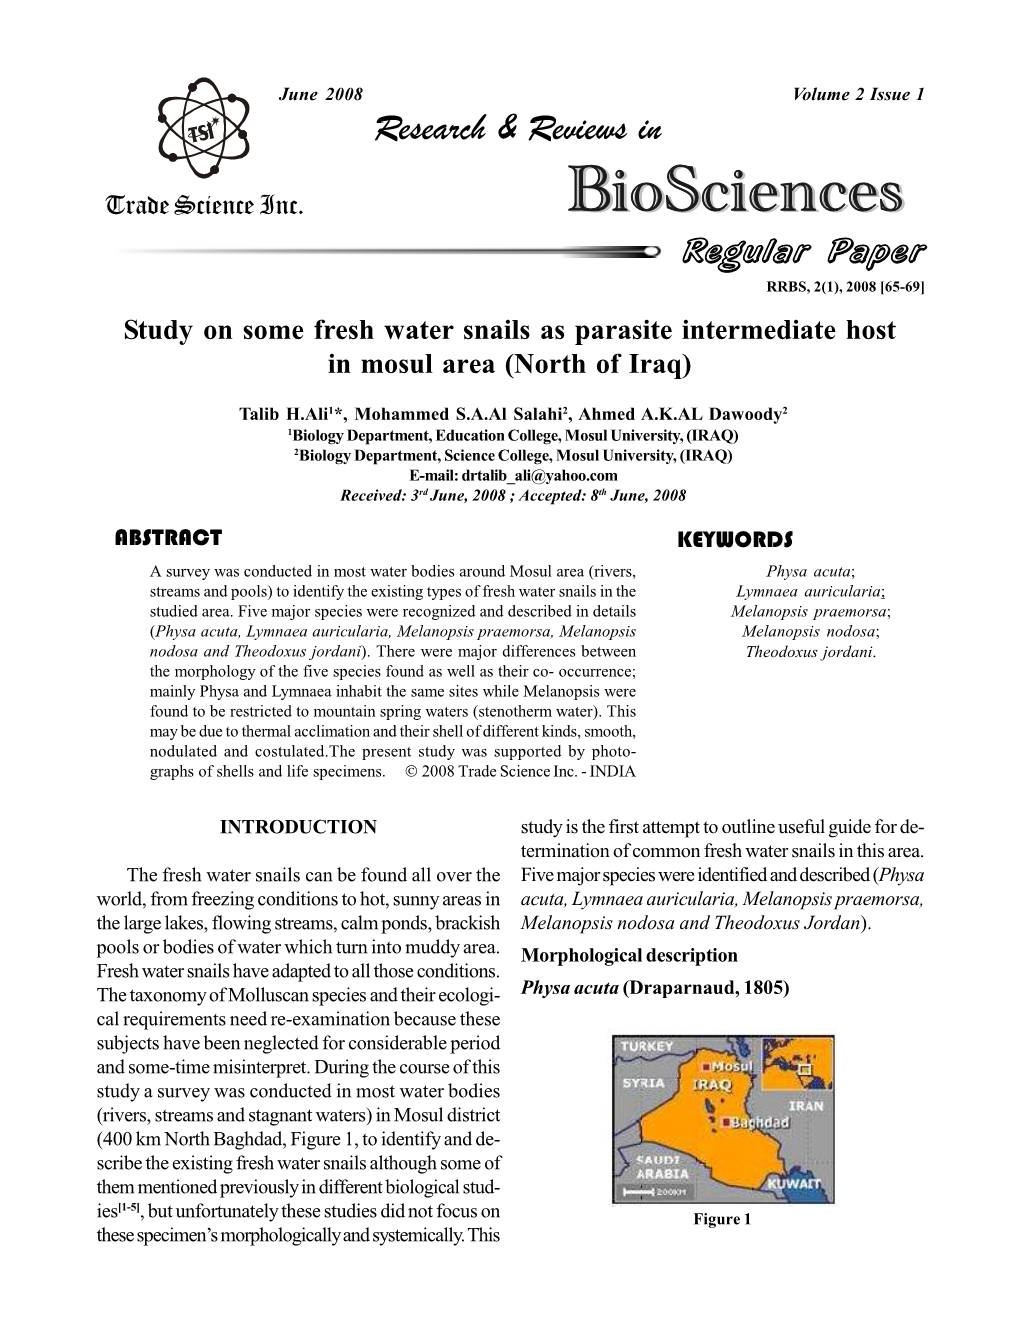 Study on Some Fresh Water Snails As Parasite Intermediate Host in Mosul Area (North of Iraq)